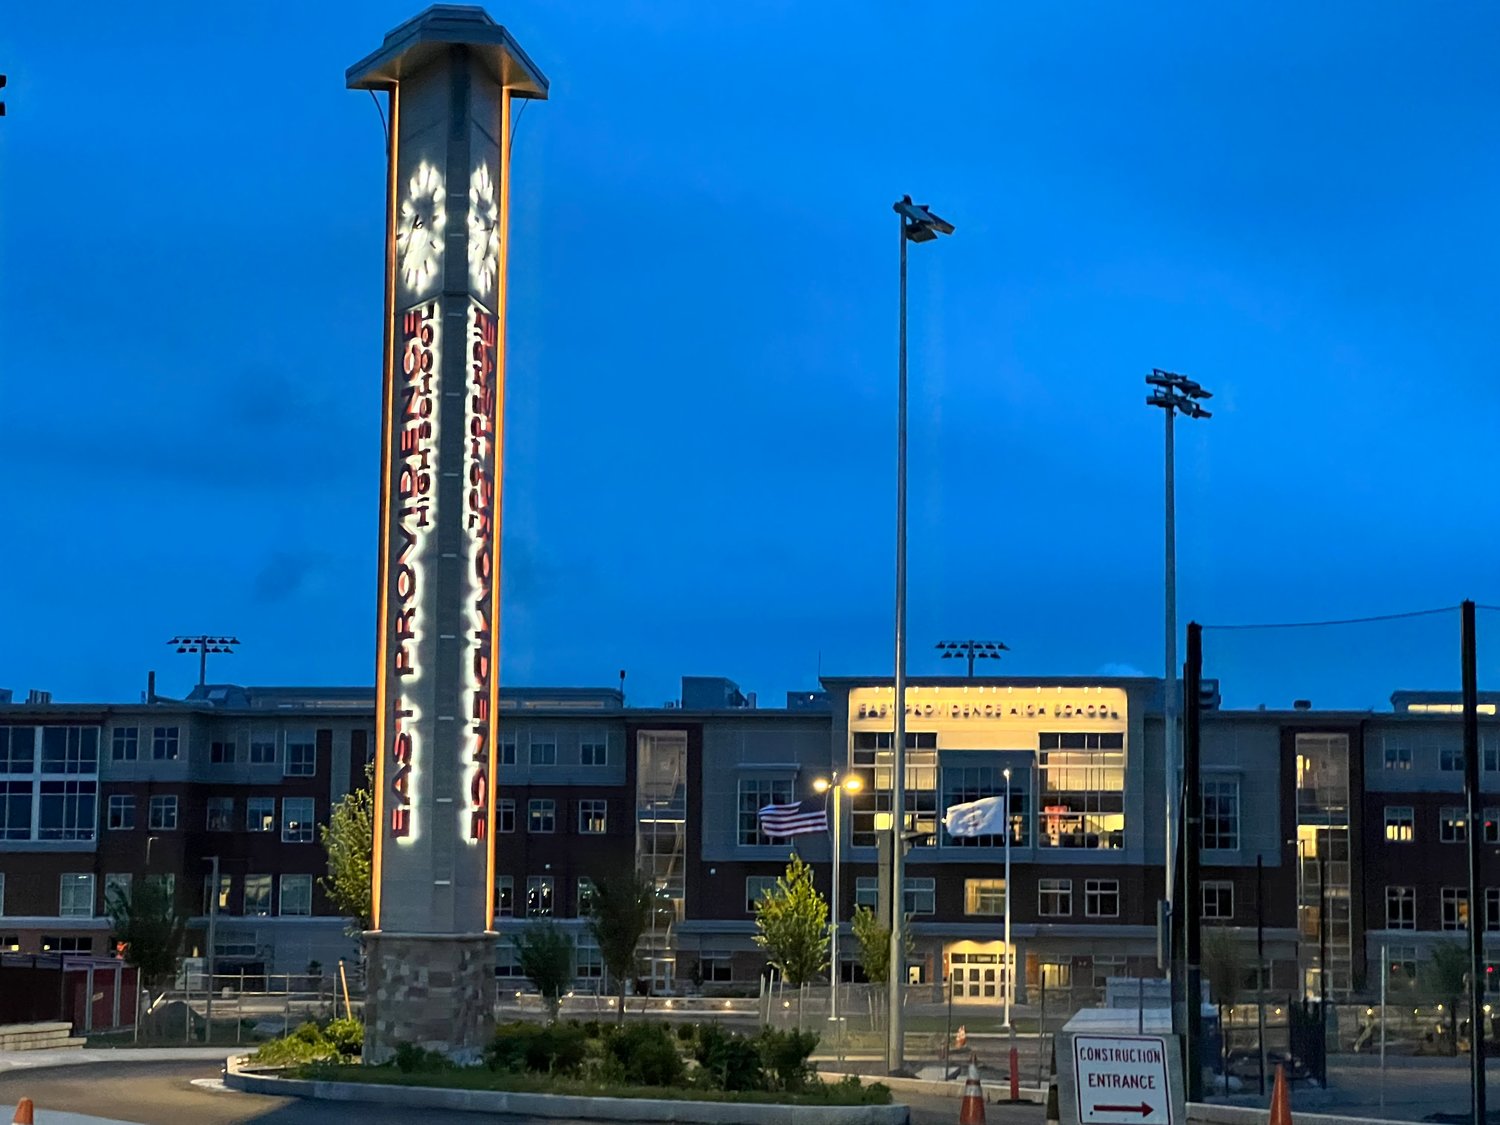 A view of the new EPHS clocktower and main entrance to the building lighted on Thursday night, June 16.